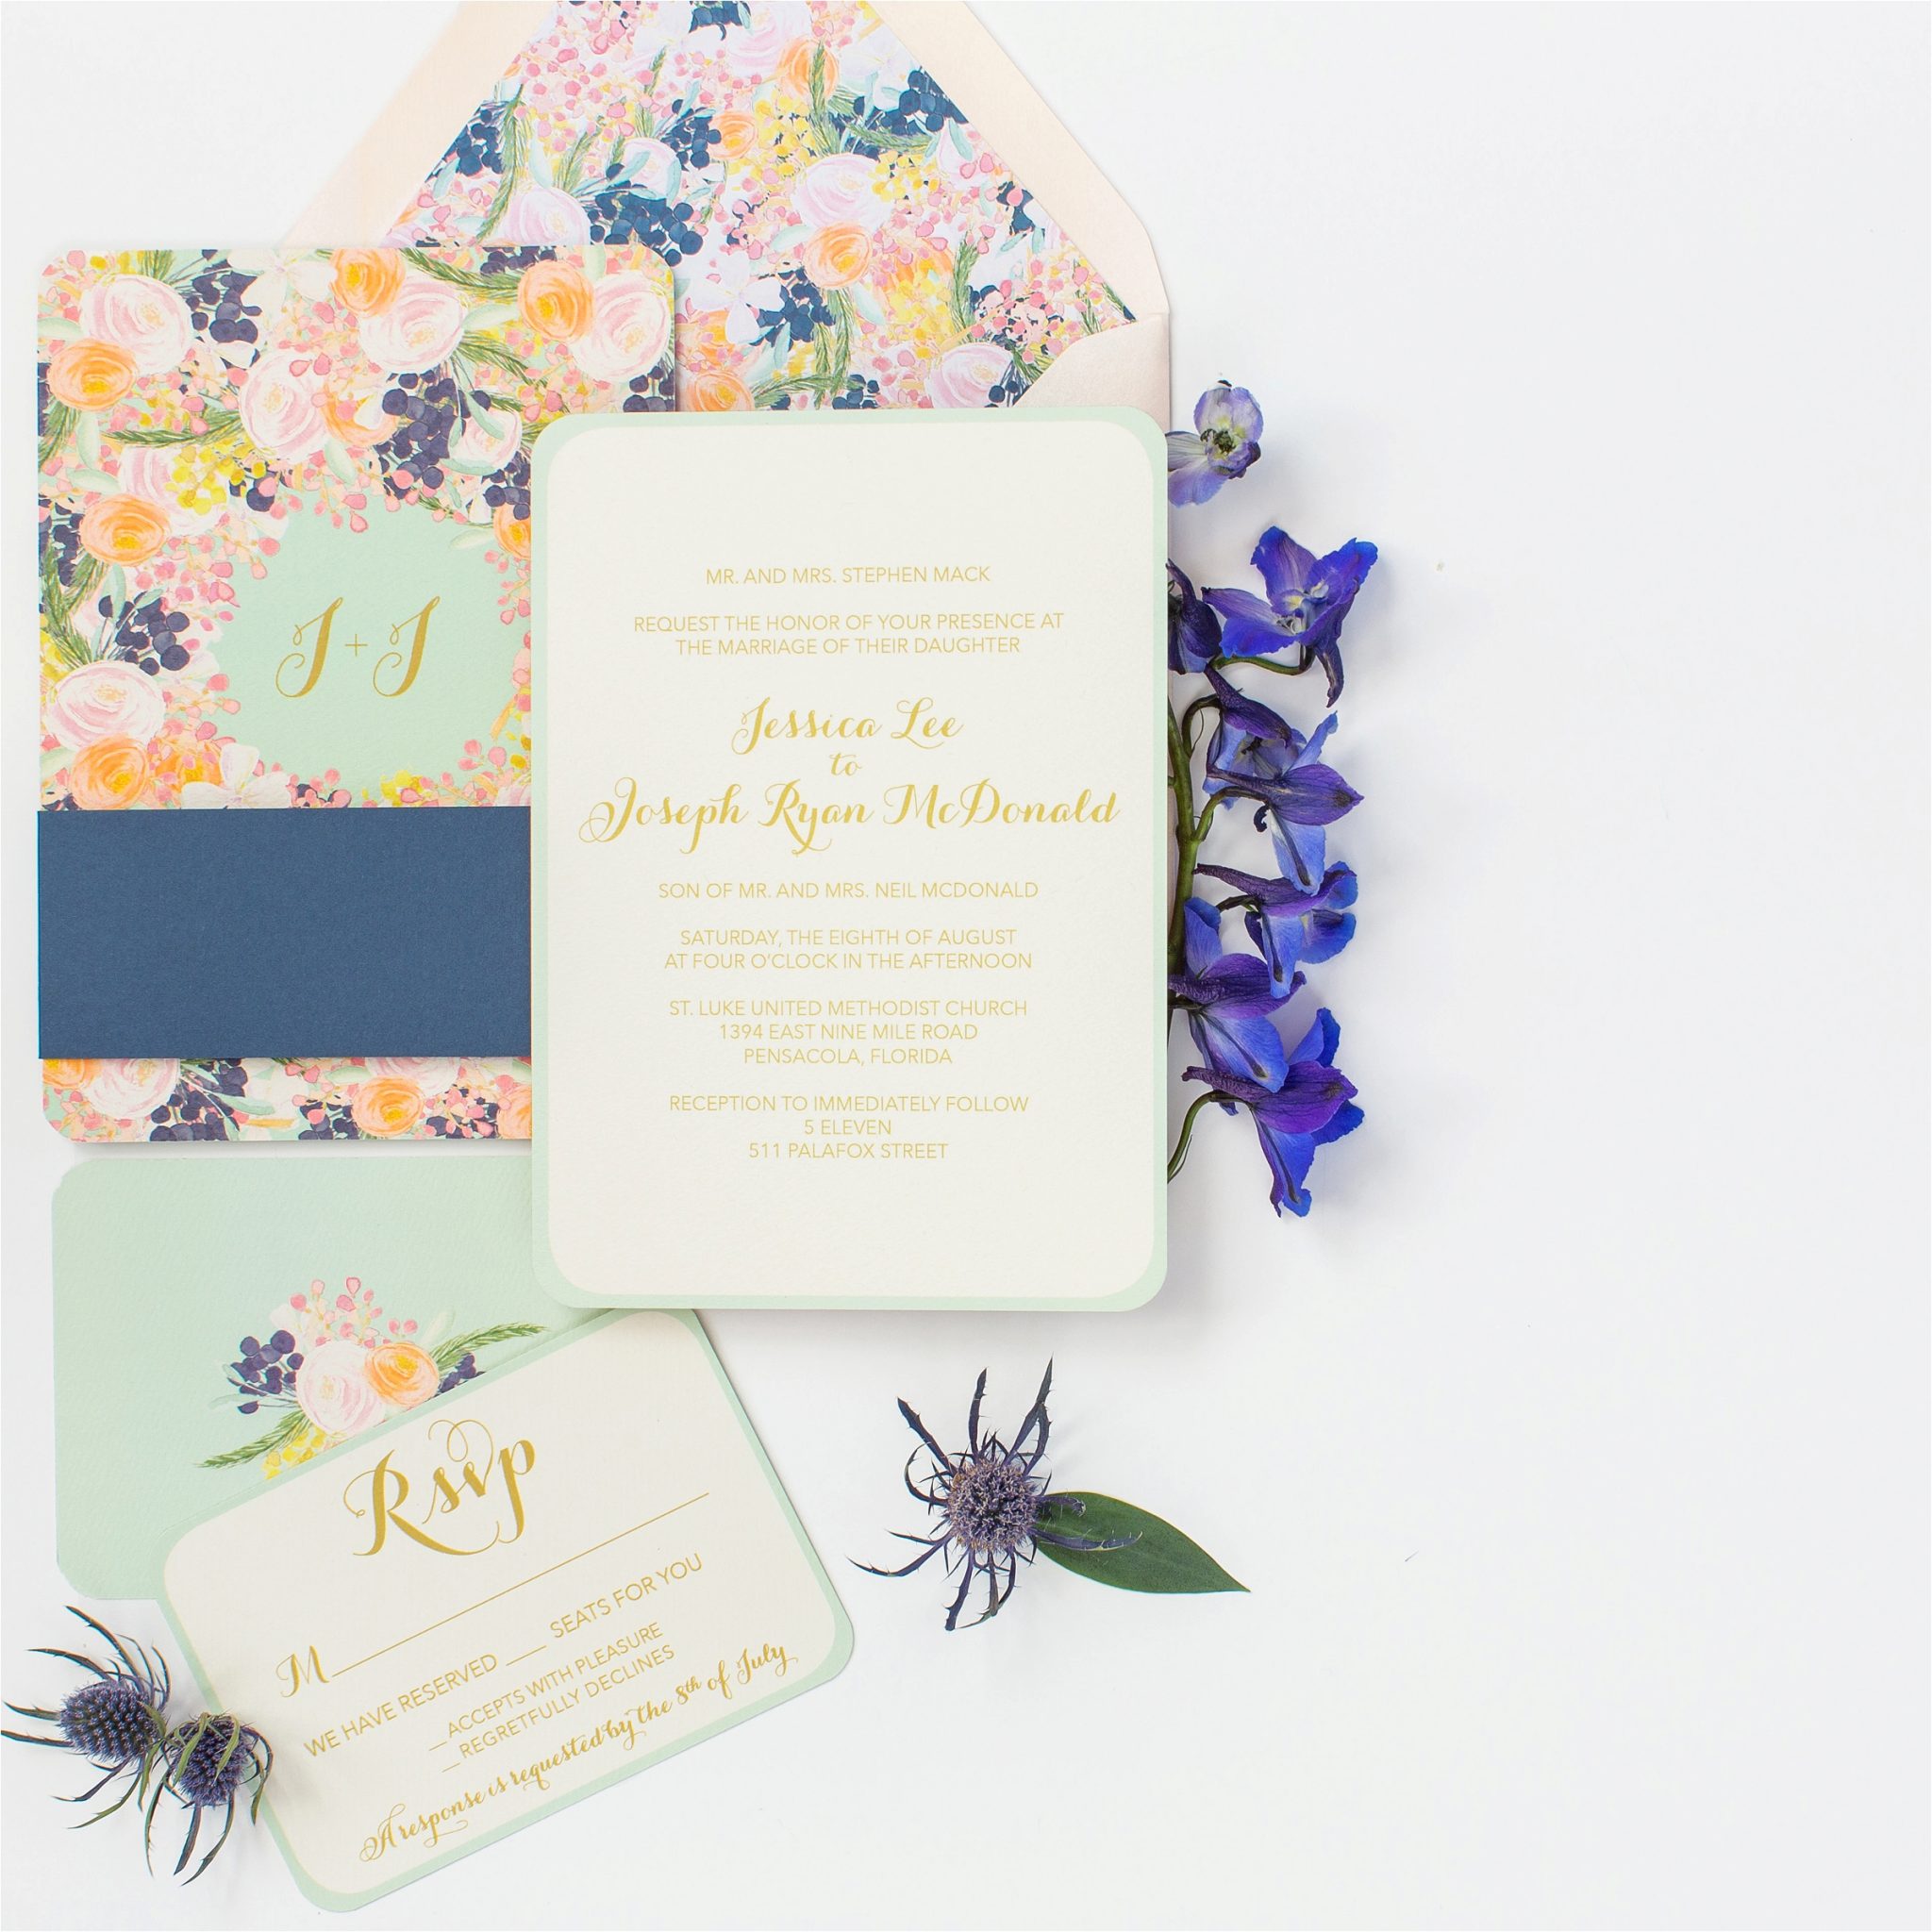 Our Wedding Invitations Designer-Grace And Serendipity-Wedding Details-Wedding Paper-Wedding invitations